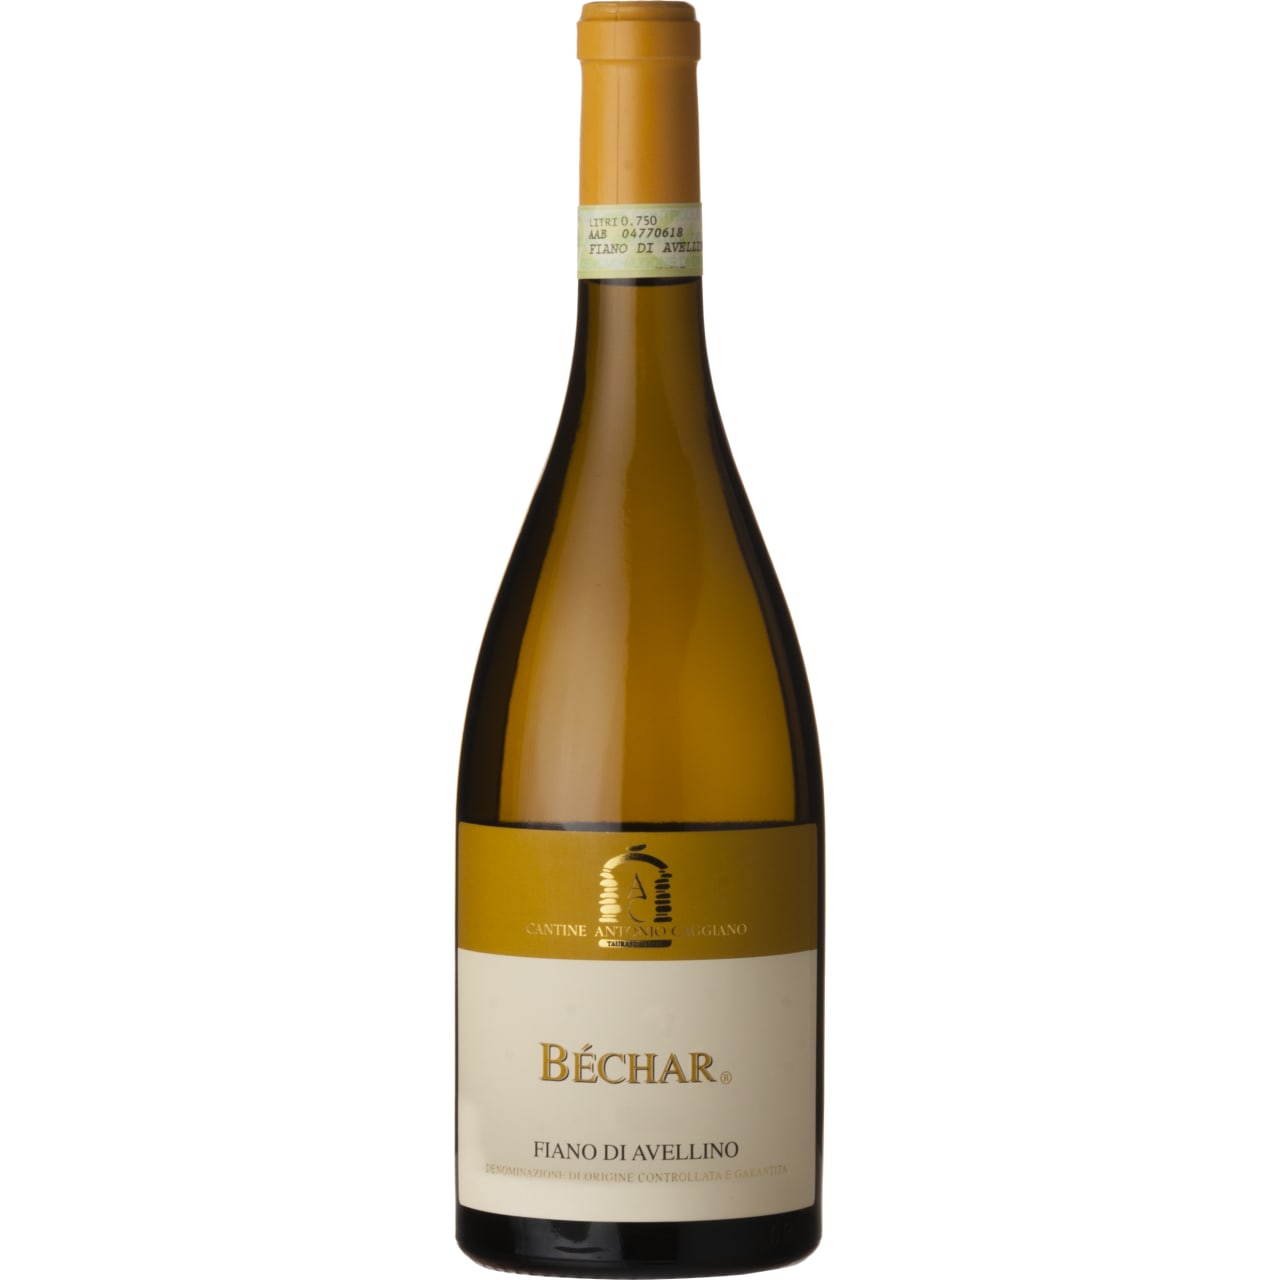 Intense gold colour. On the nose this wine presents aromas of apple, pears and banana. On the palate it has a full bodied rich and persistant flavours of tropical fruit and a refreshing acidity.